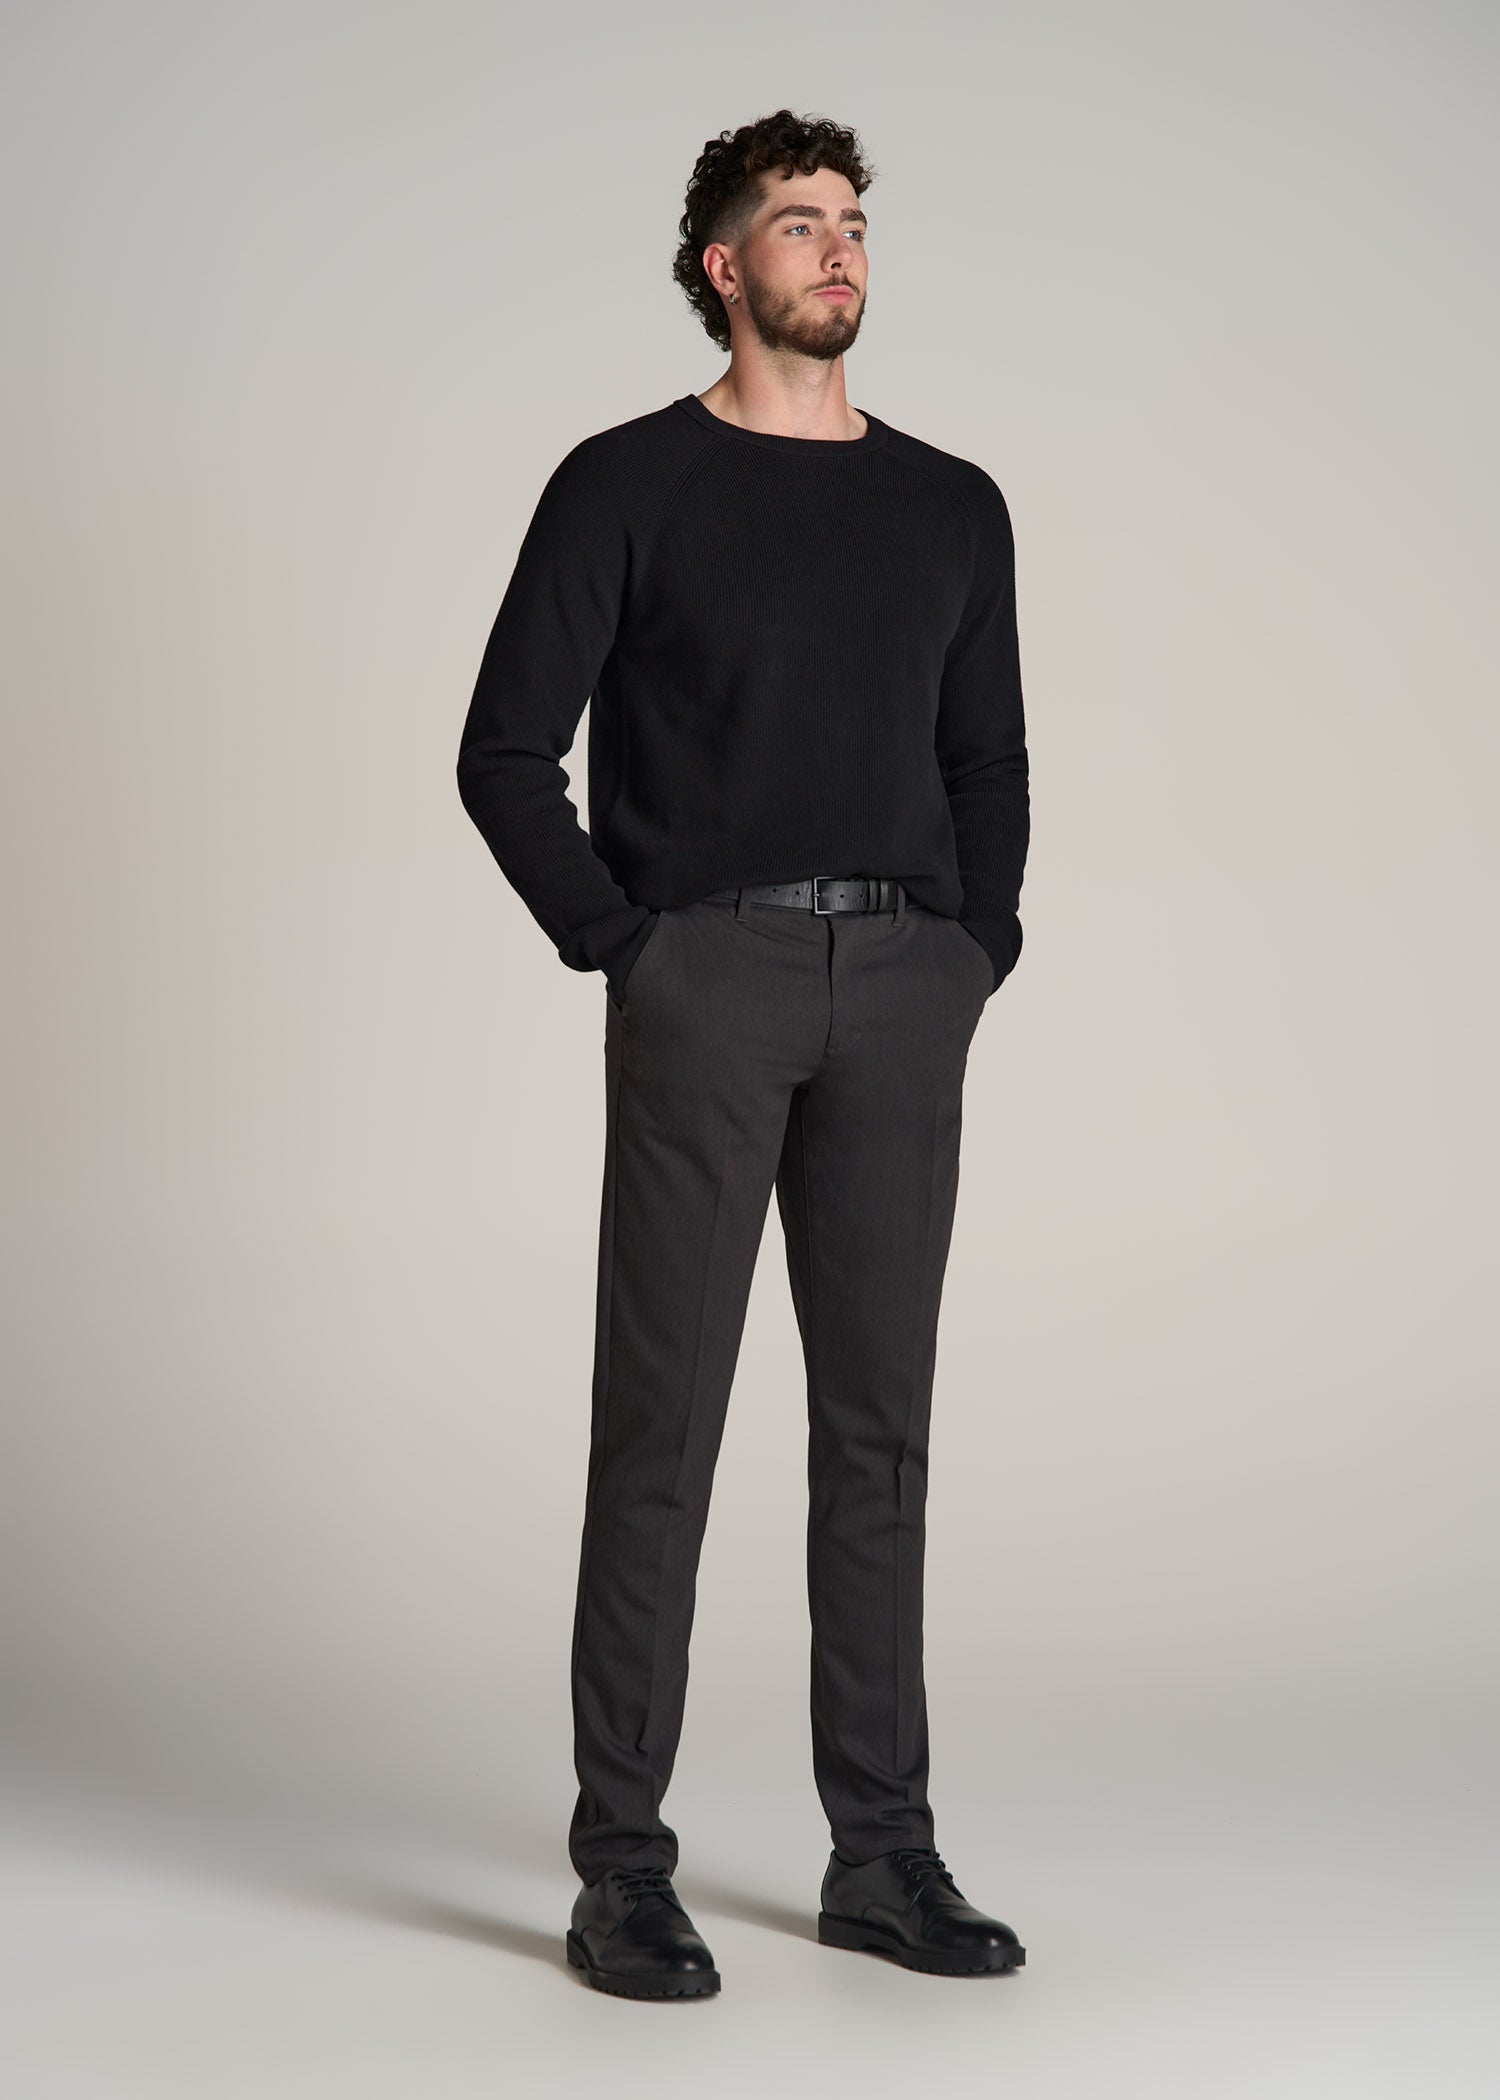 Knitted See Through Pants Black, Combos Knitwear